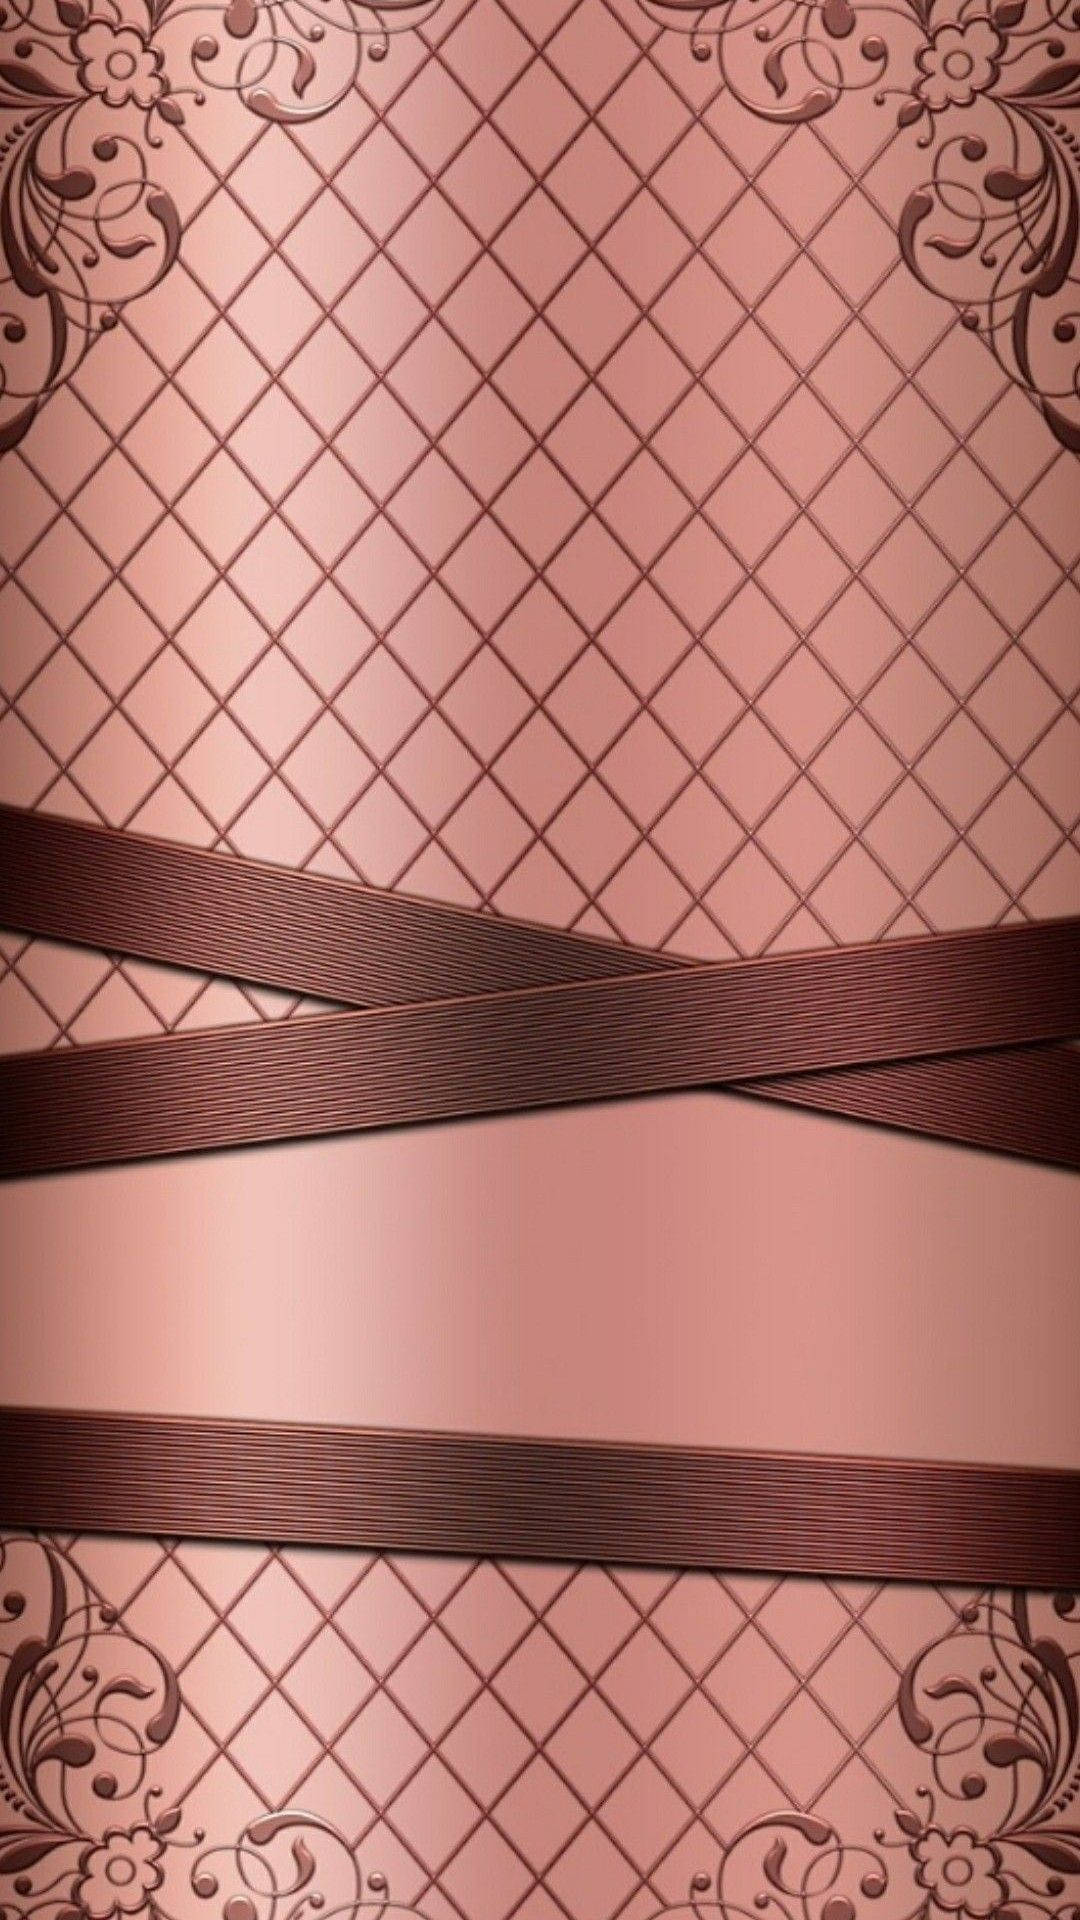 Lace Pattern Rose Gold Iphone Wallpaper